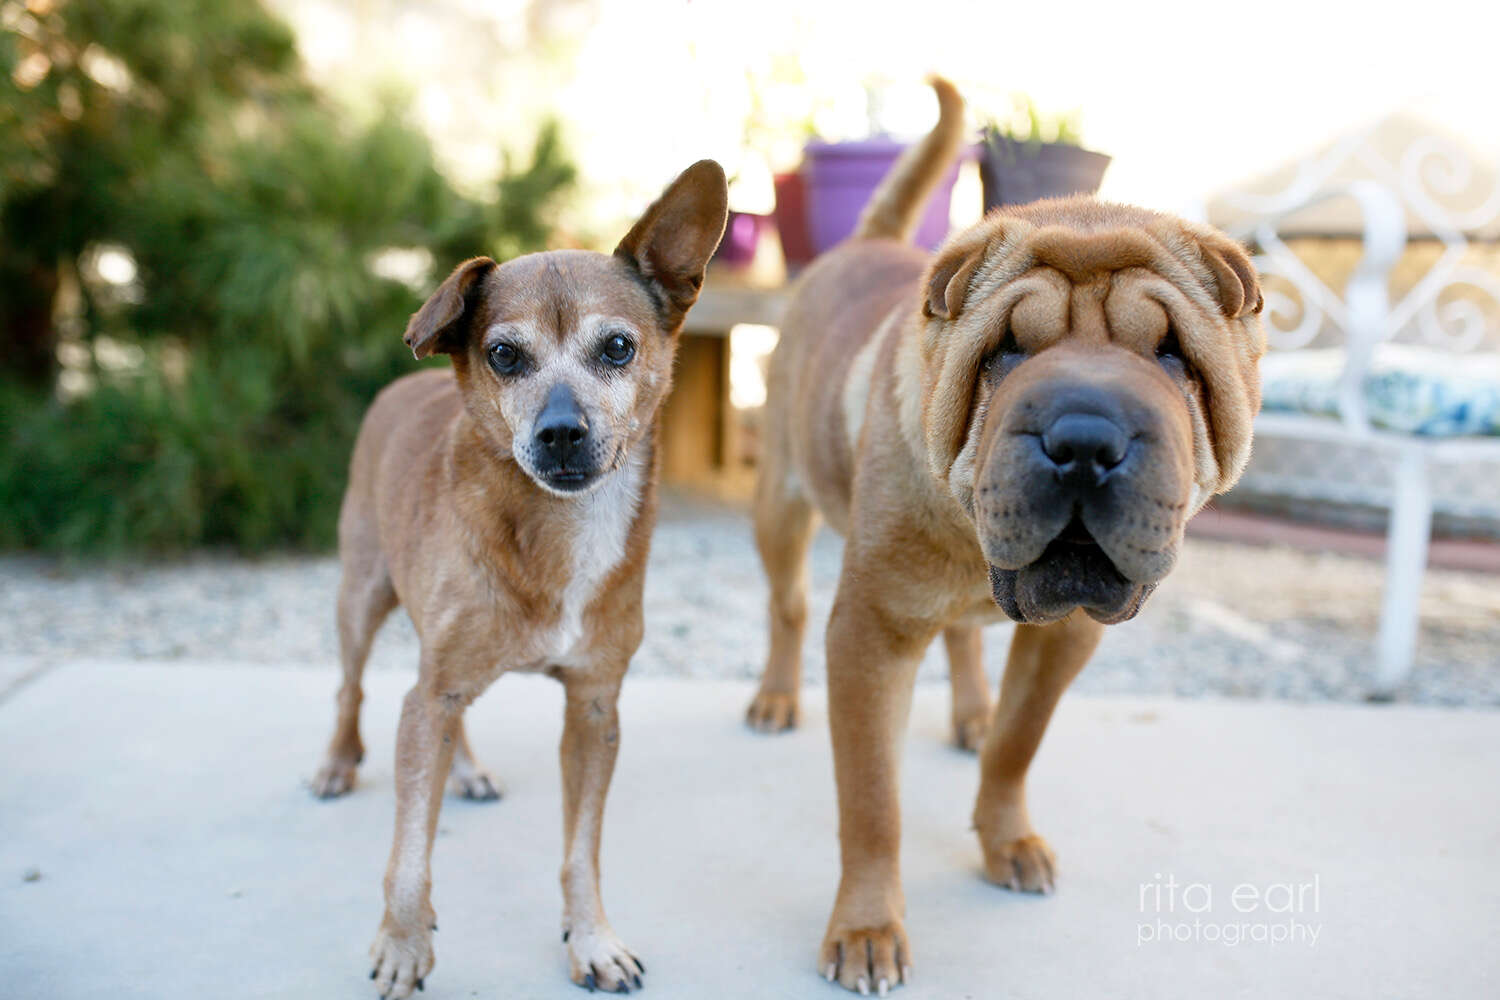 Chihuahua and Shar-Pei standing next to each other